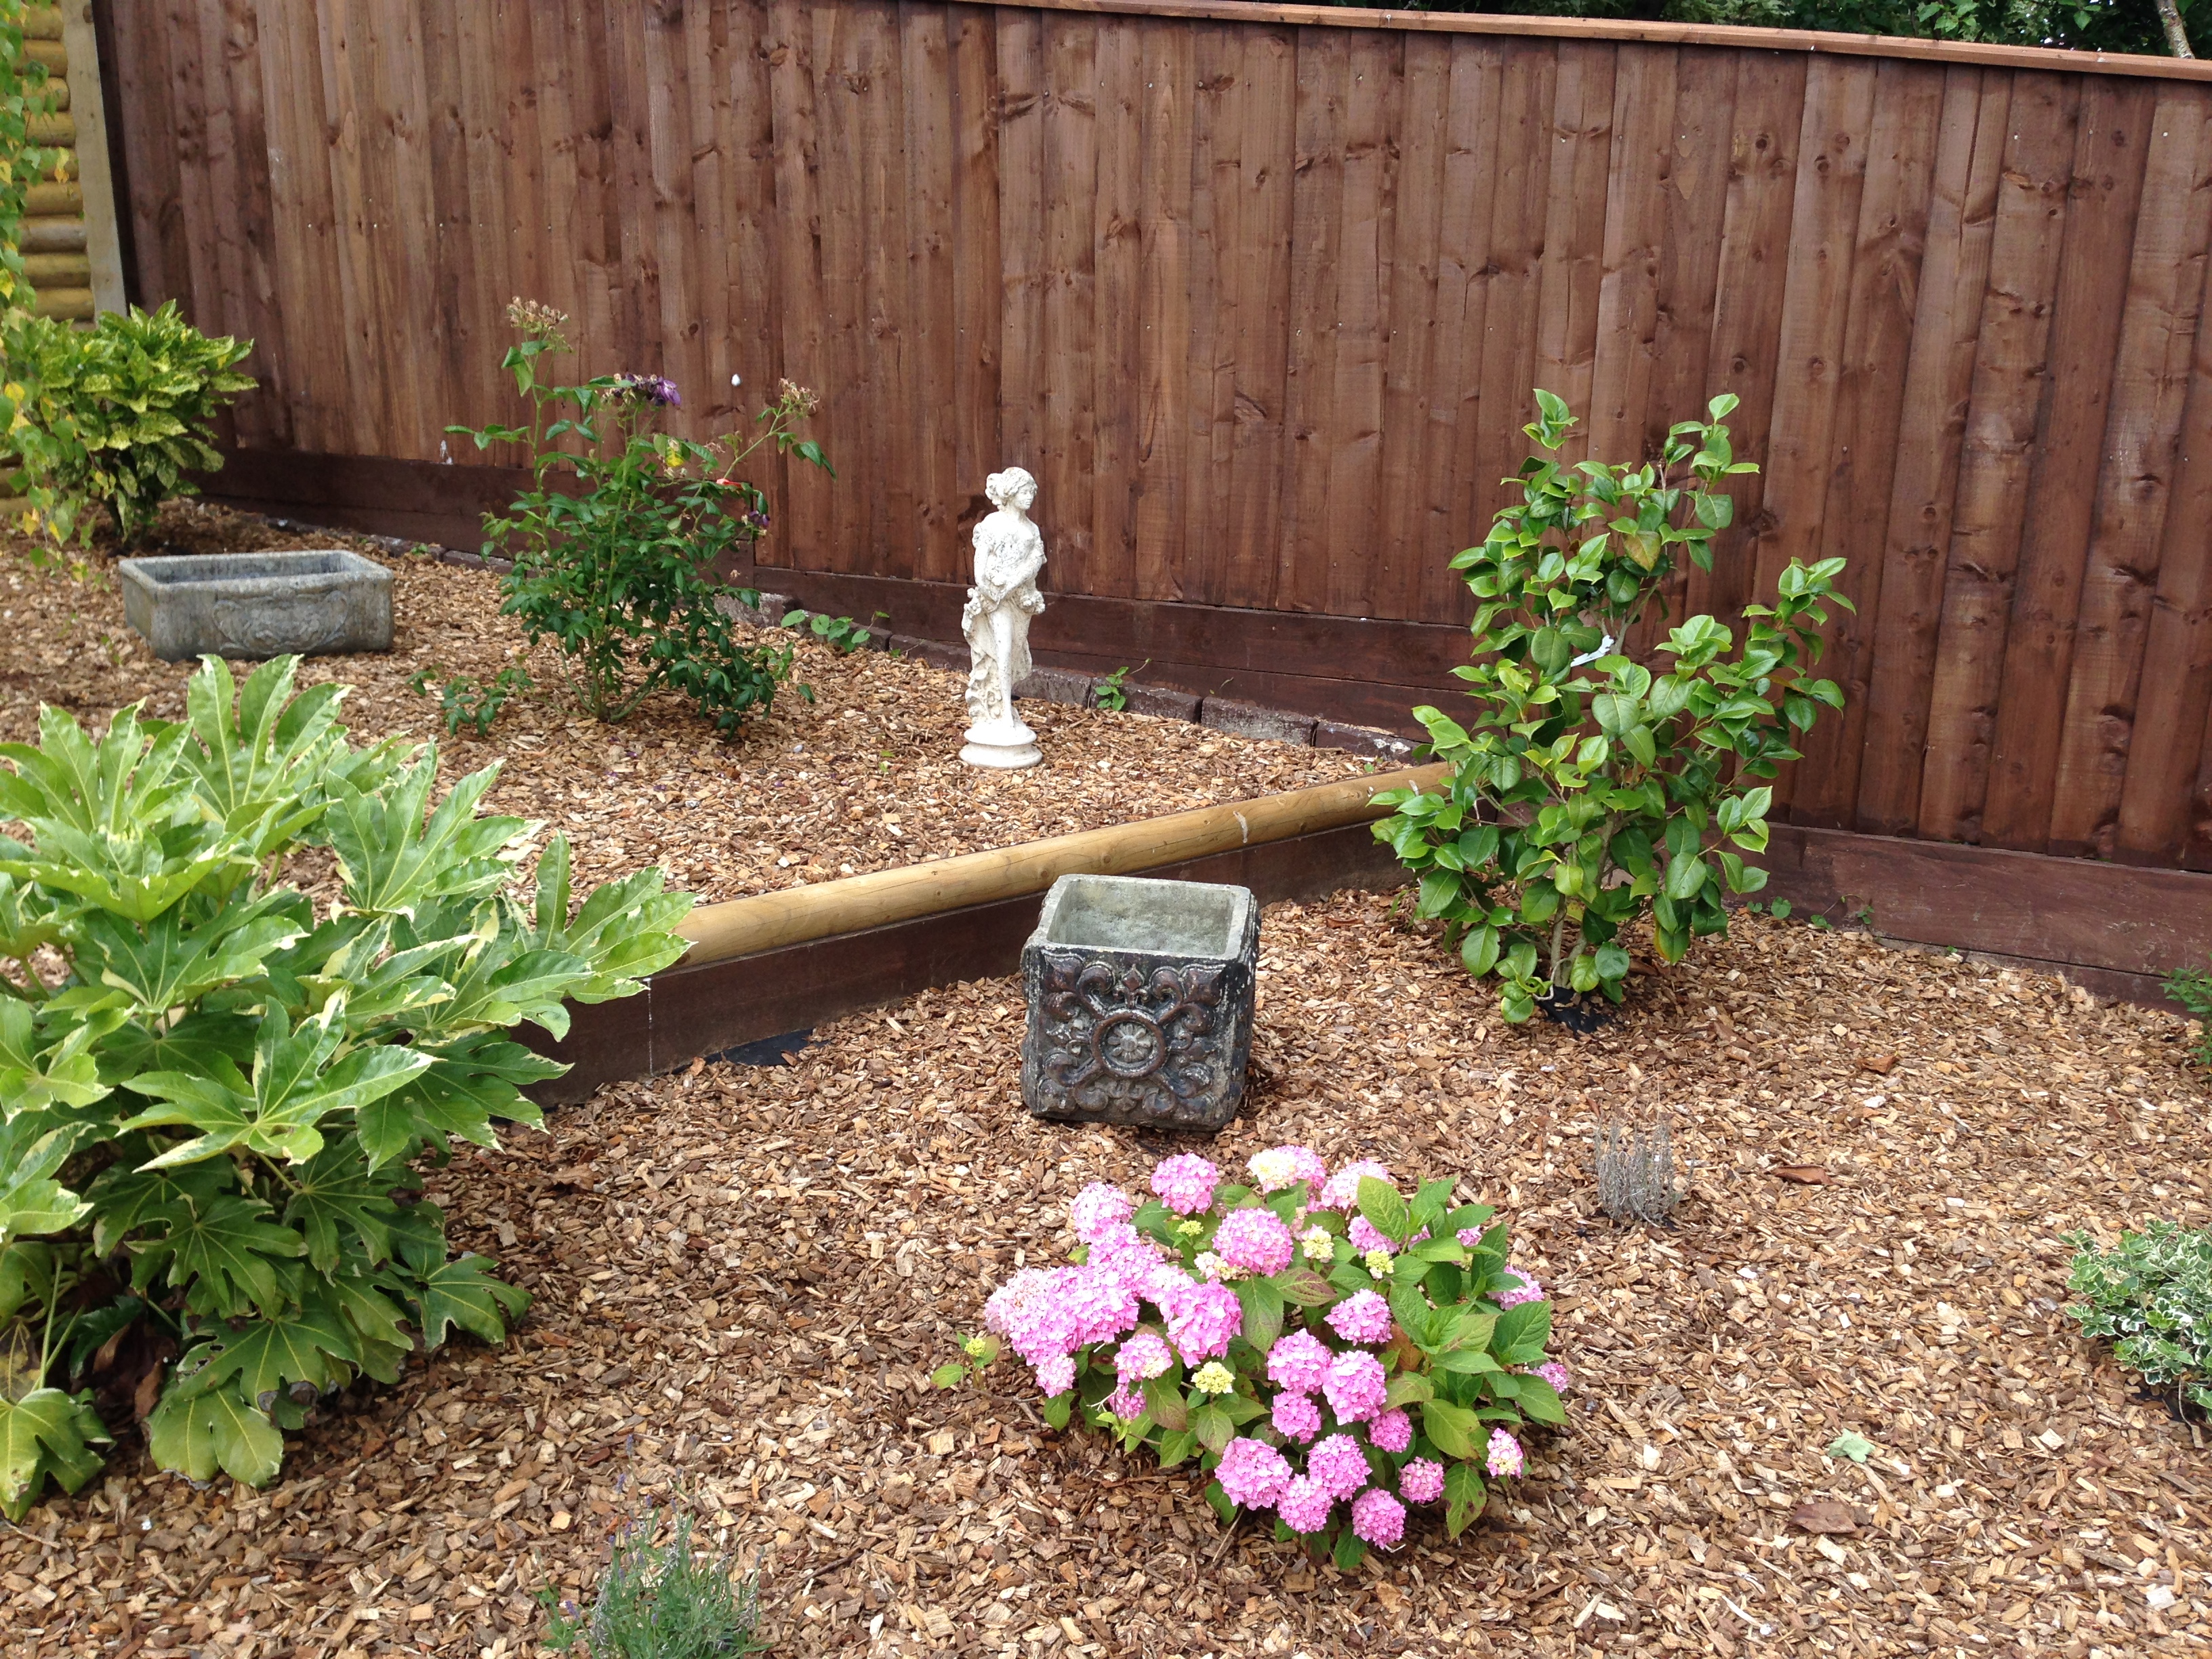  garden design with bark chippings